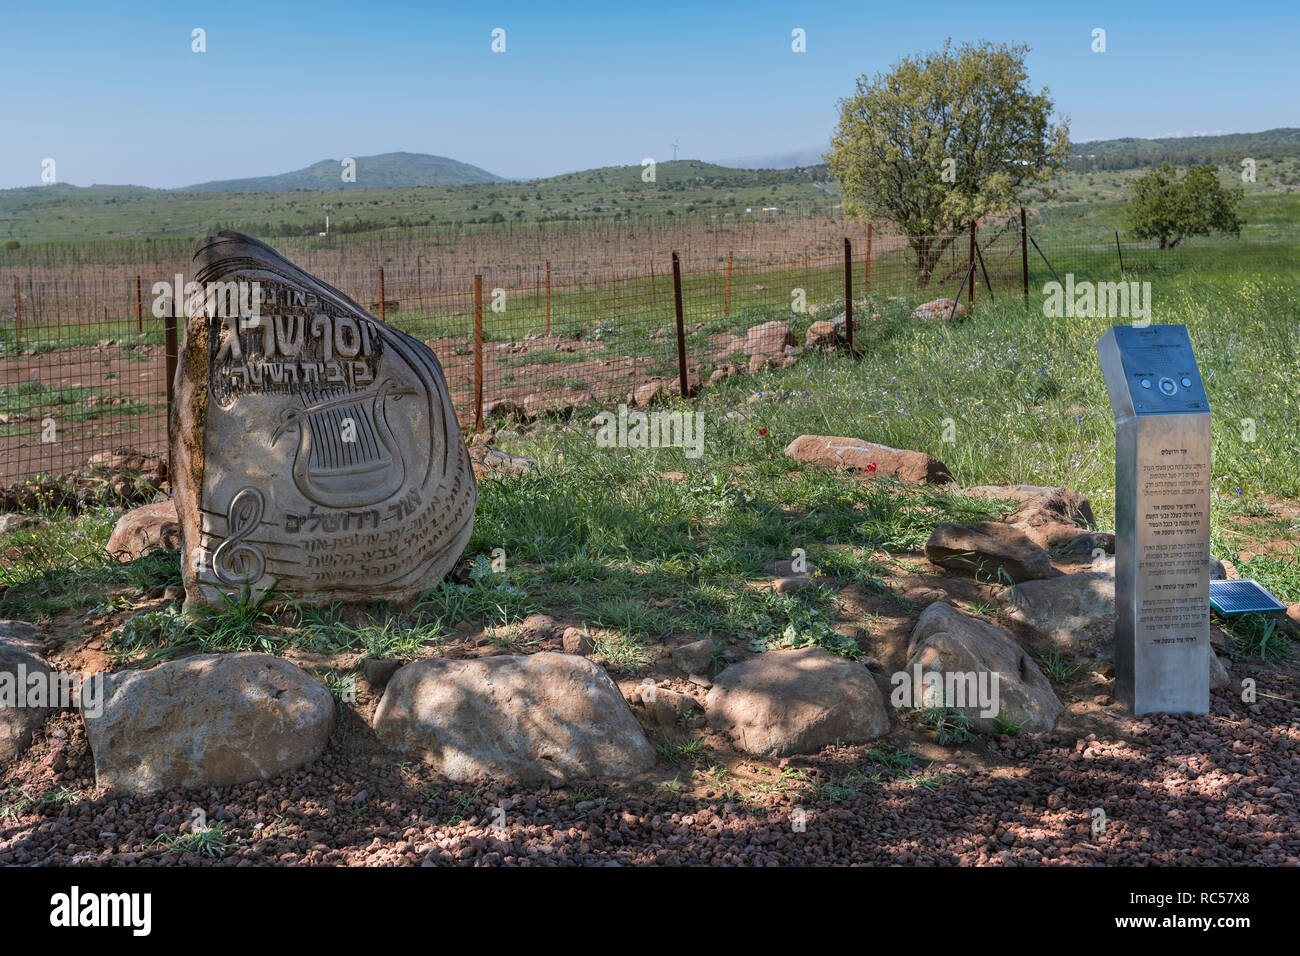 A memorial dedicate to famous Israeli musician and Poet, Yosef Sarig. Golan Heights. It is possible to hear his popular songs on this spot. Stock Photo